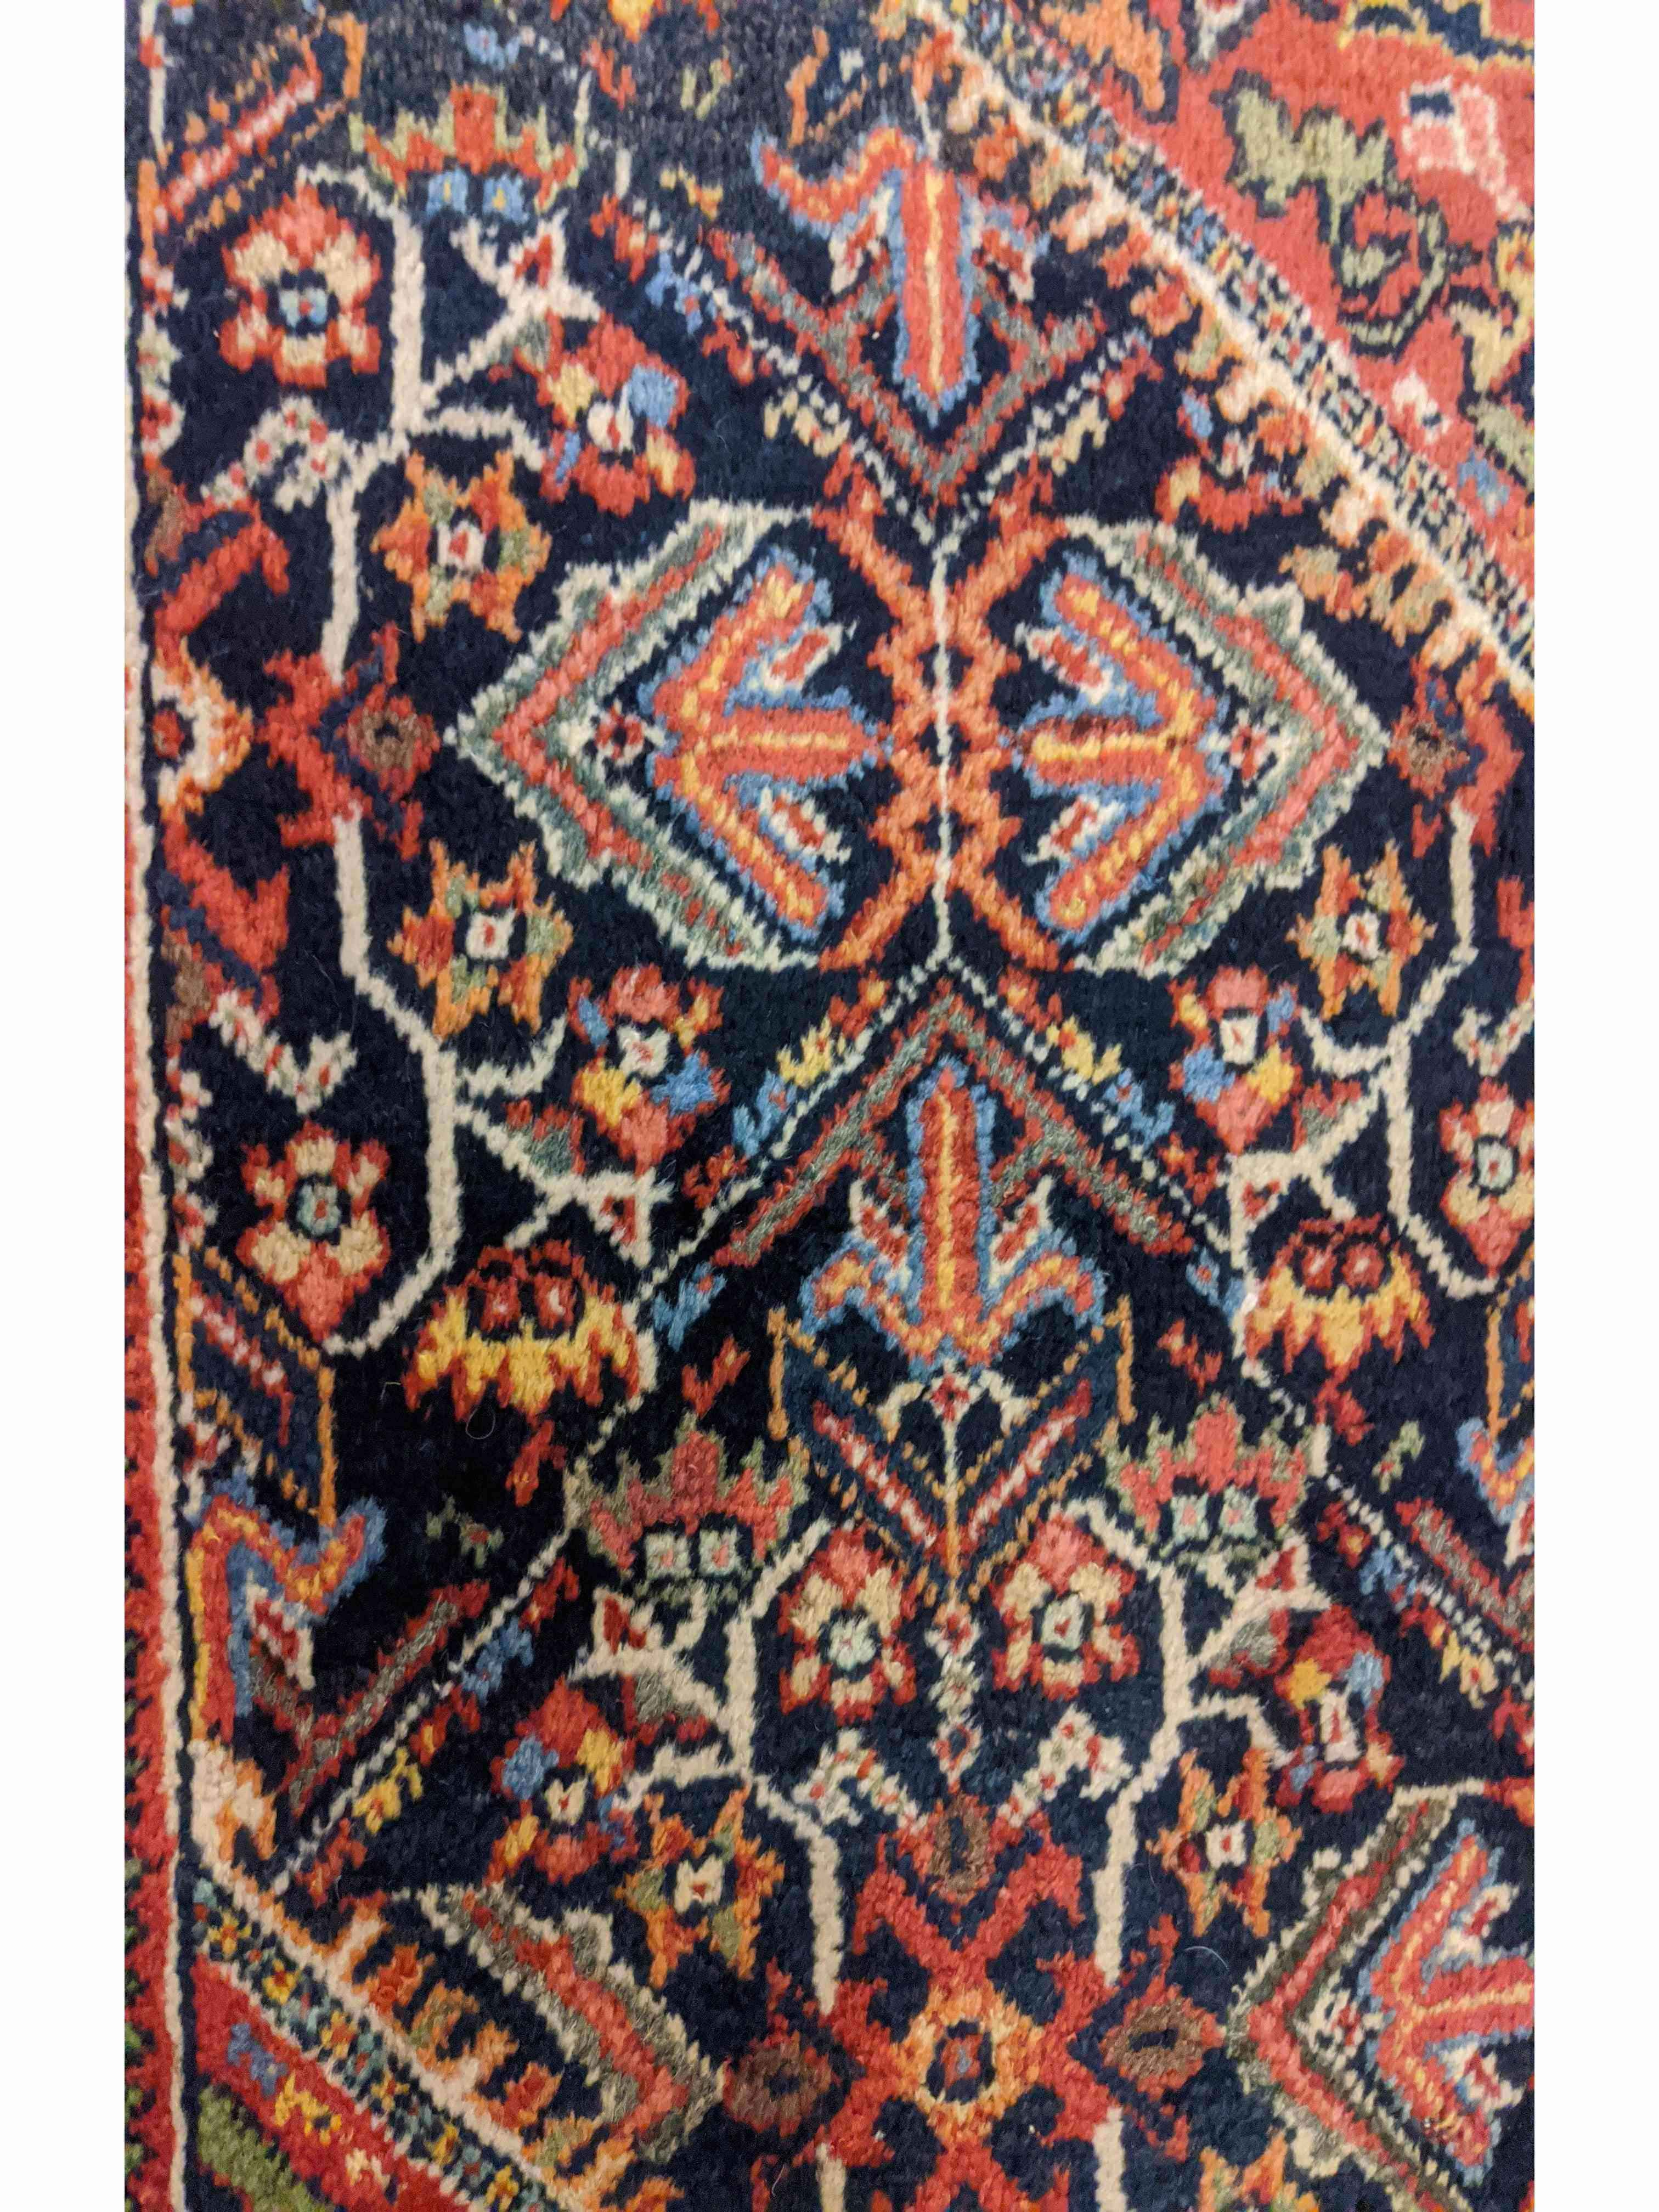 206 x 133 cm old malayer Traditional Brown Rug - Rugmaster